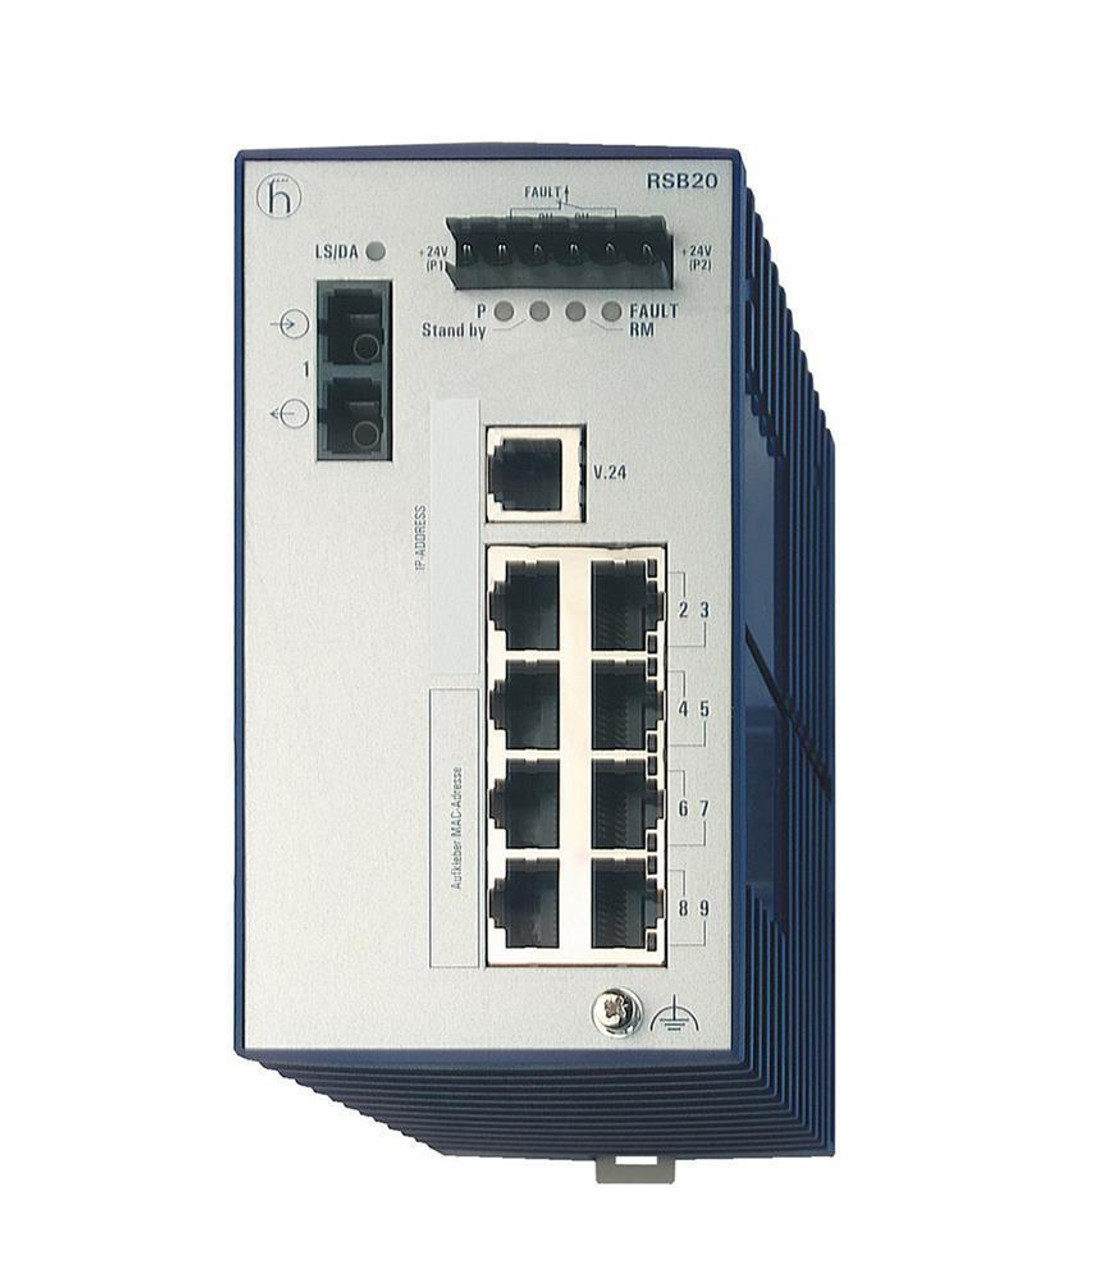 Hirschmann Mananaged Industrial Ethernet Rail Switch with 6 RJ45 Fast (100 Mbps) Copper Ports and 3 Fast (10/100) Fiber Multimode Ports with SC